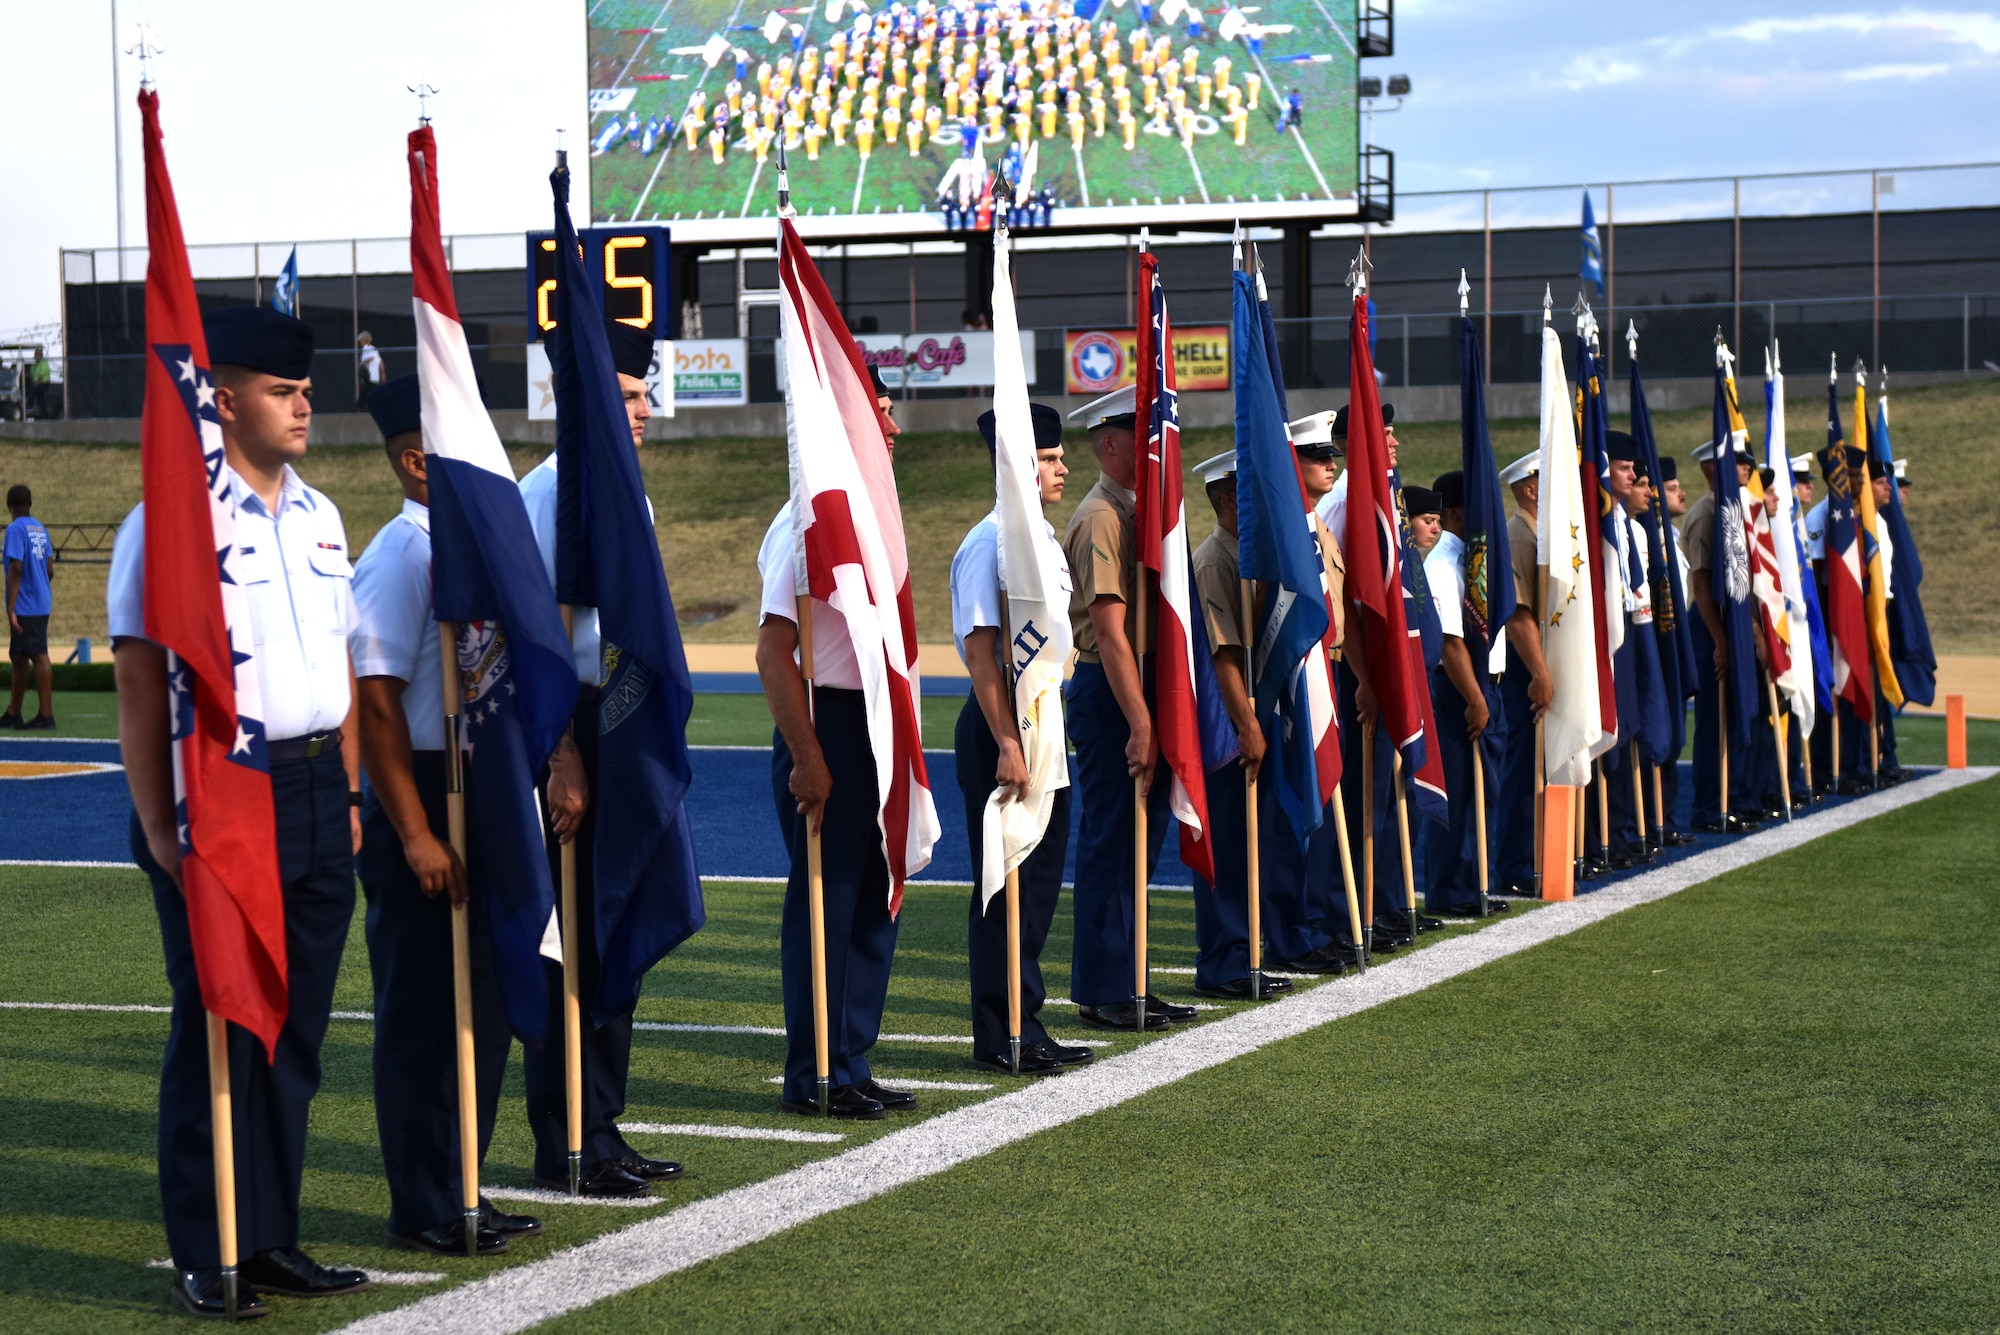 Goodfellow military members display the fifty state flags during halftime at the Angelo State University vs Simon Fraser game as a part of military appreciation night on the 1st Community Credit Union Field, San Angelo, Texas, Sept. 14, 2019. During the halftime show there was a presentation of the fifty state flags, swearing in of individuals waiting to go to basic training and the Goofellow Honor Guard presented the colors. (U.S. Air Force photo by Senior Airman Seraiah Wolf/Released)